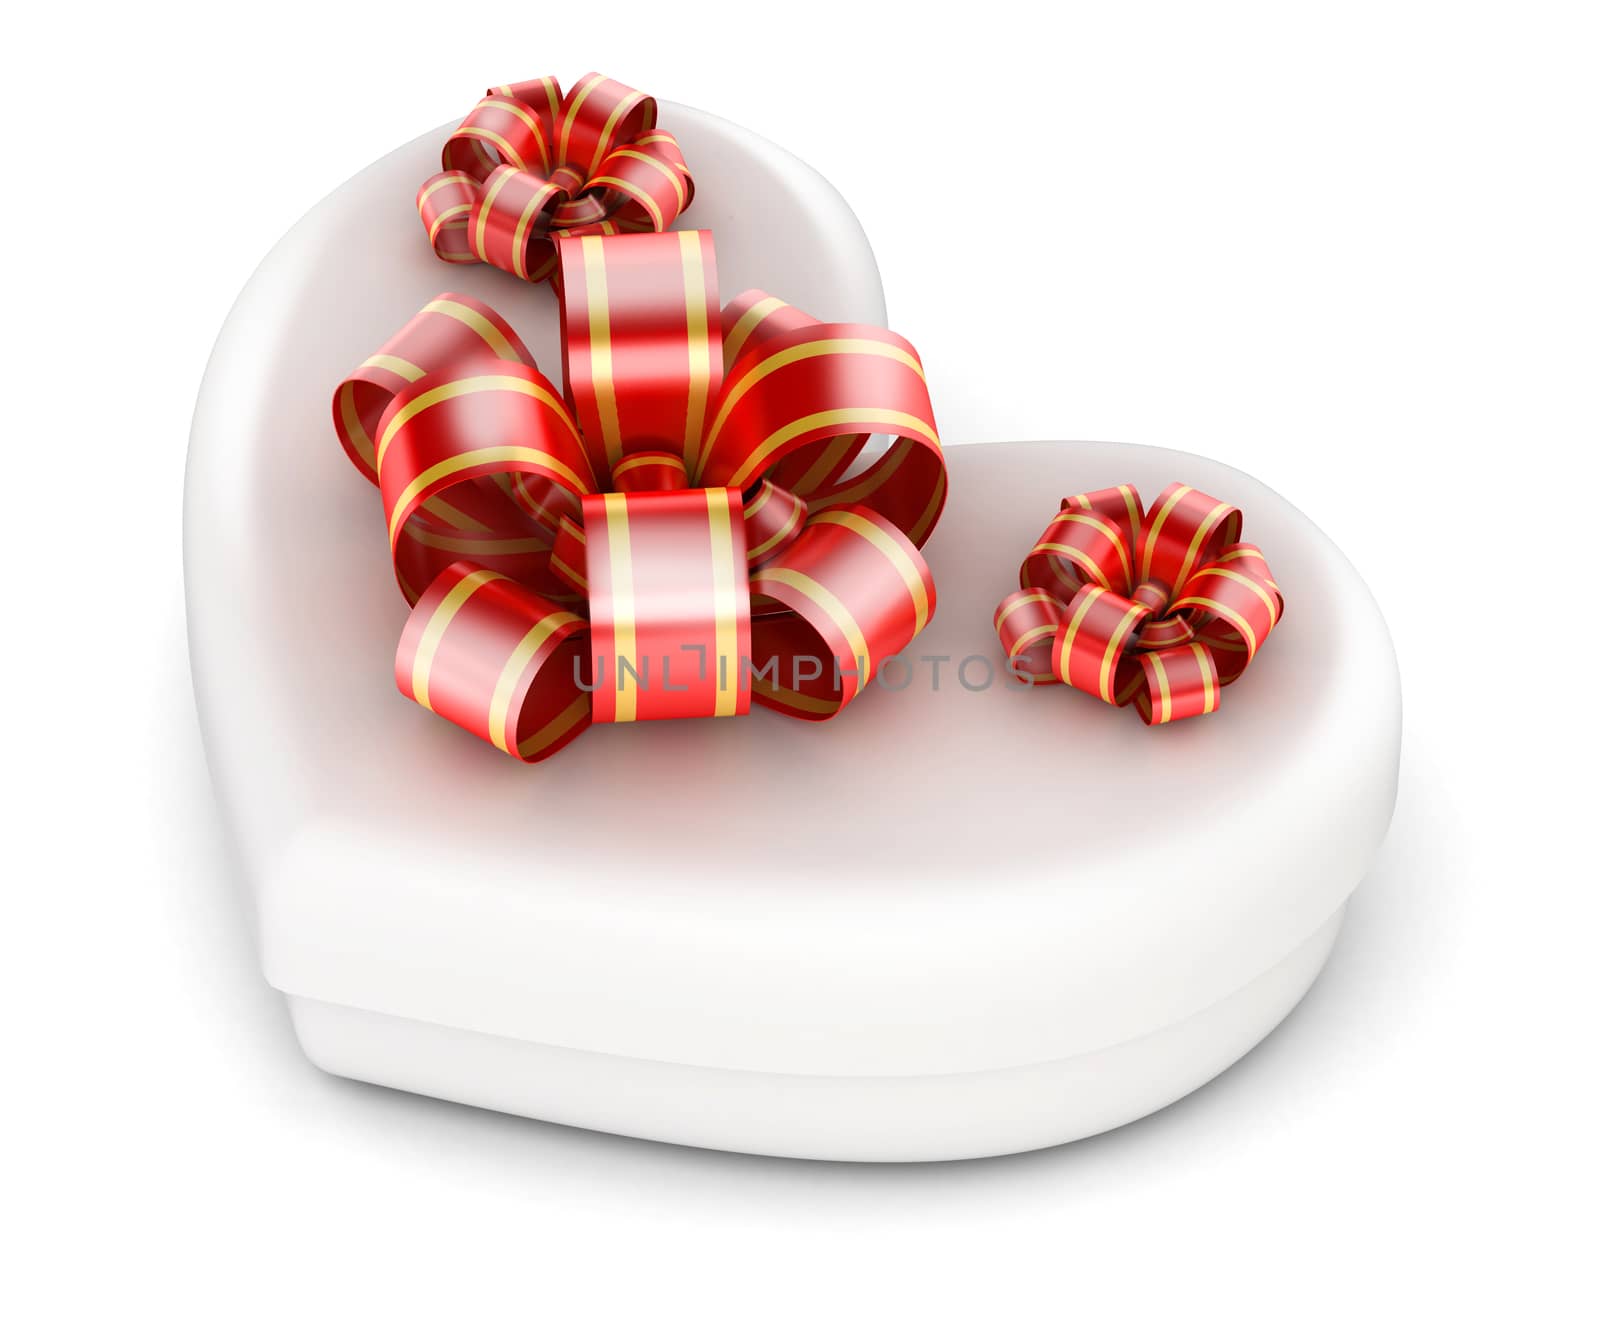 Heart shaped gift box with red ribbons